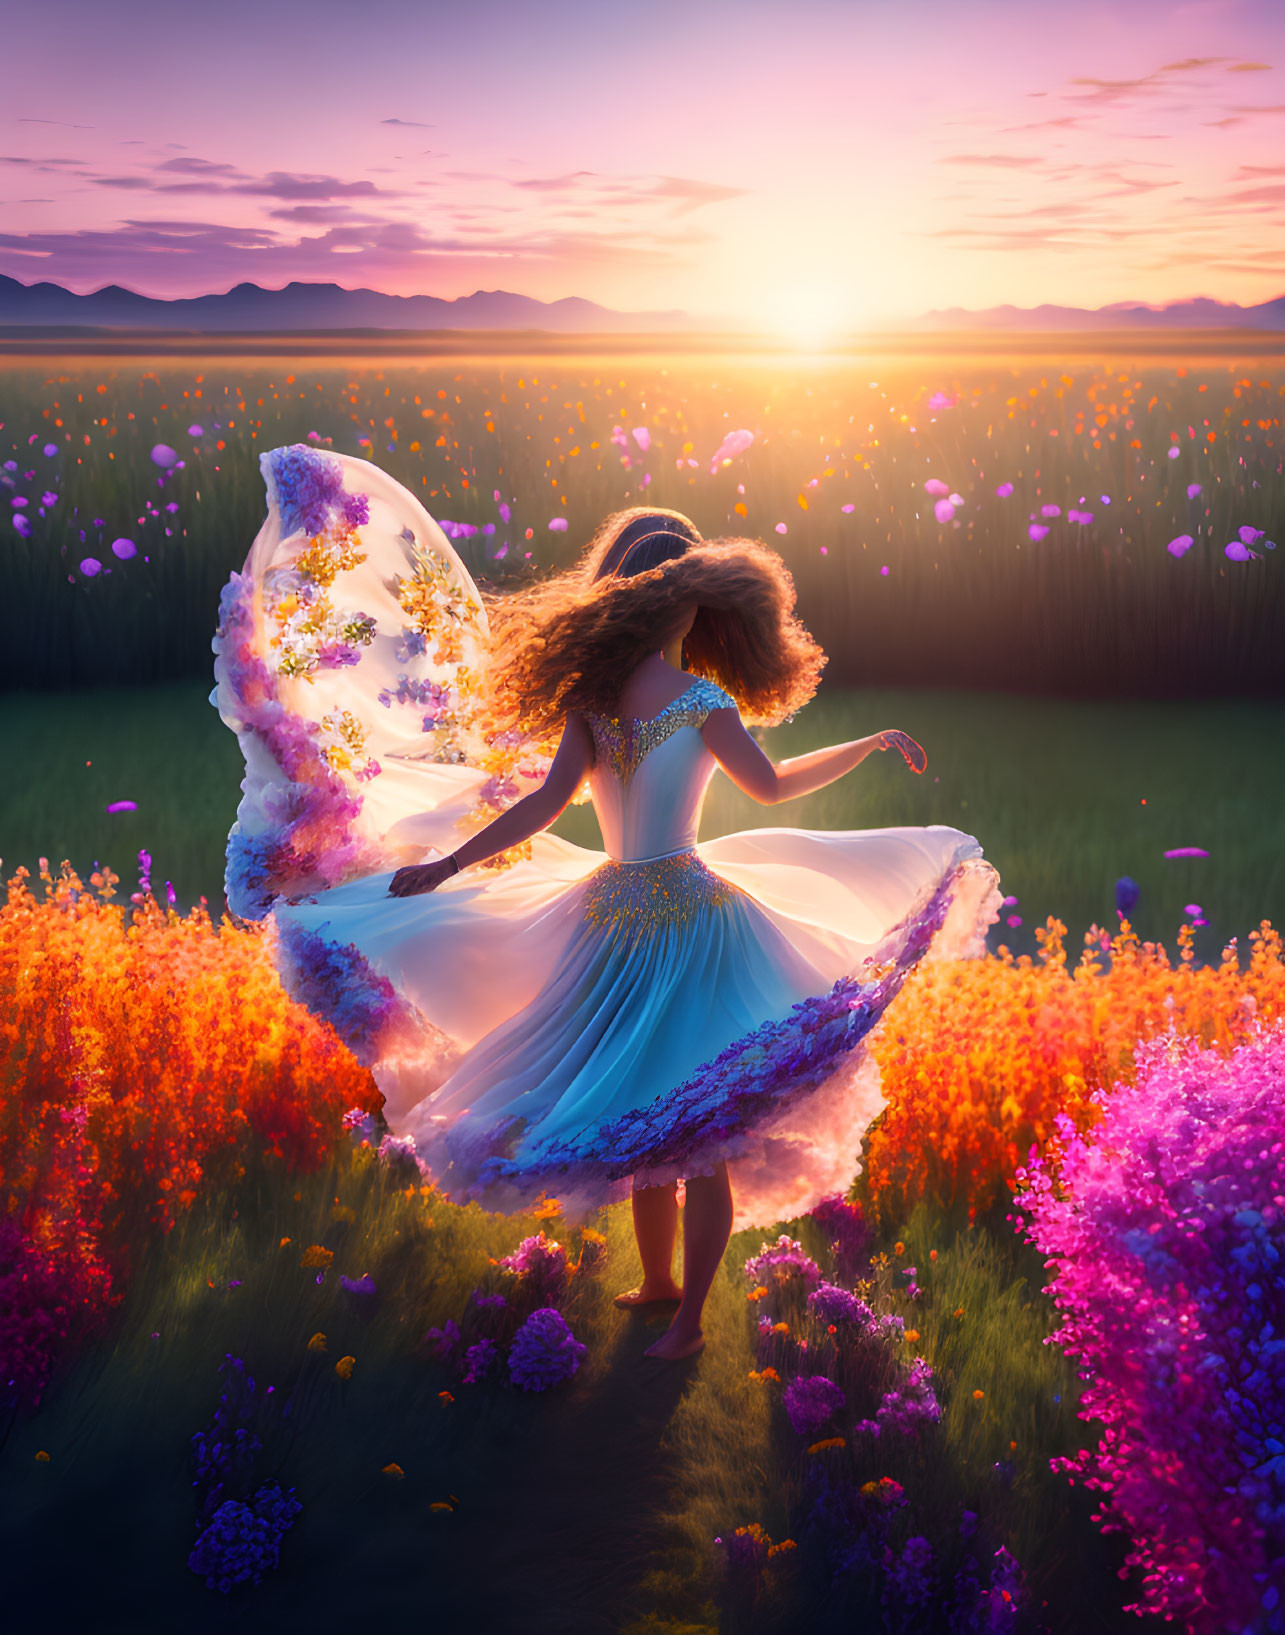 Woman with butterfly wings in vibrant flower field at sunrise